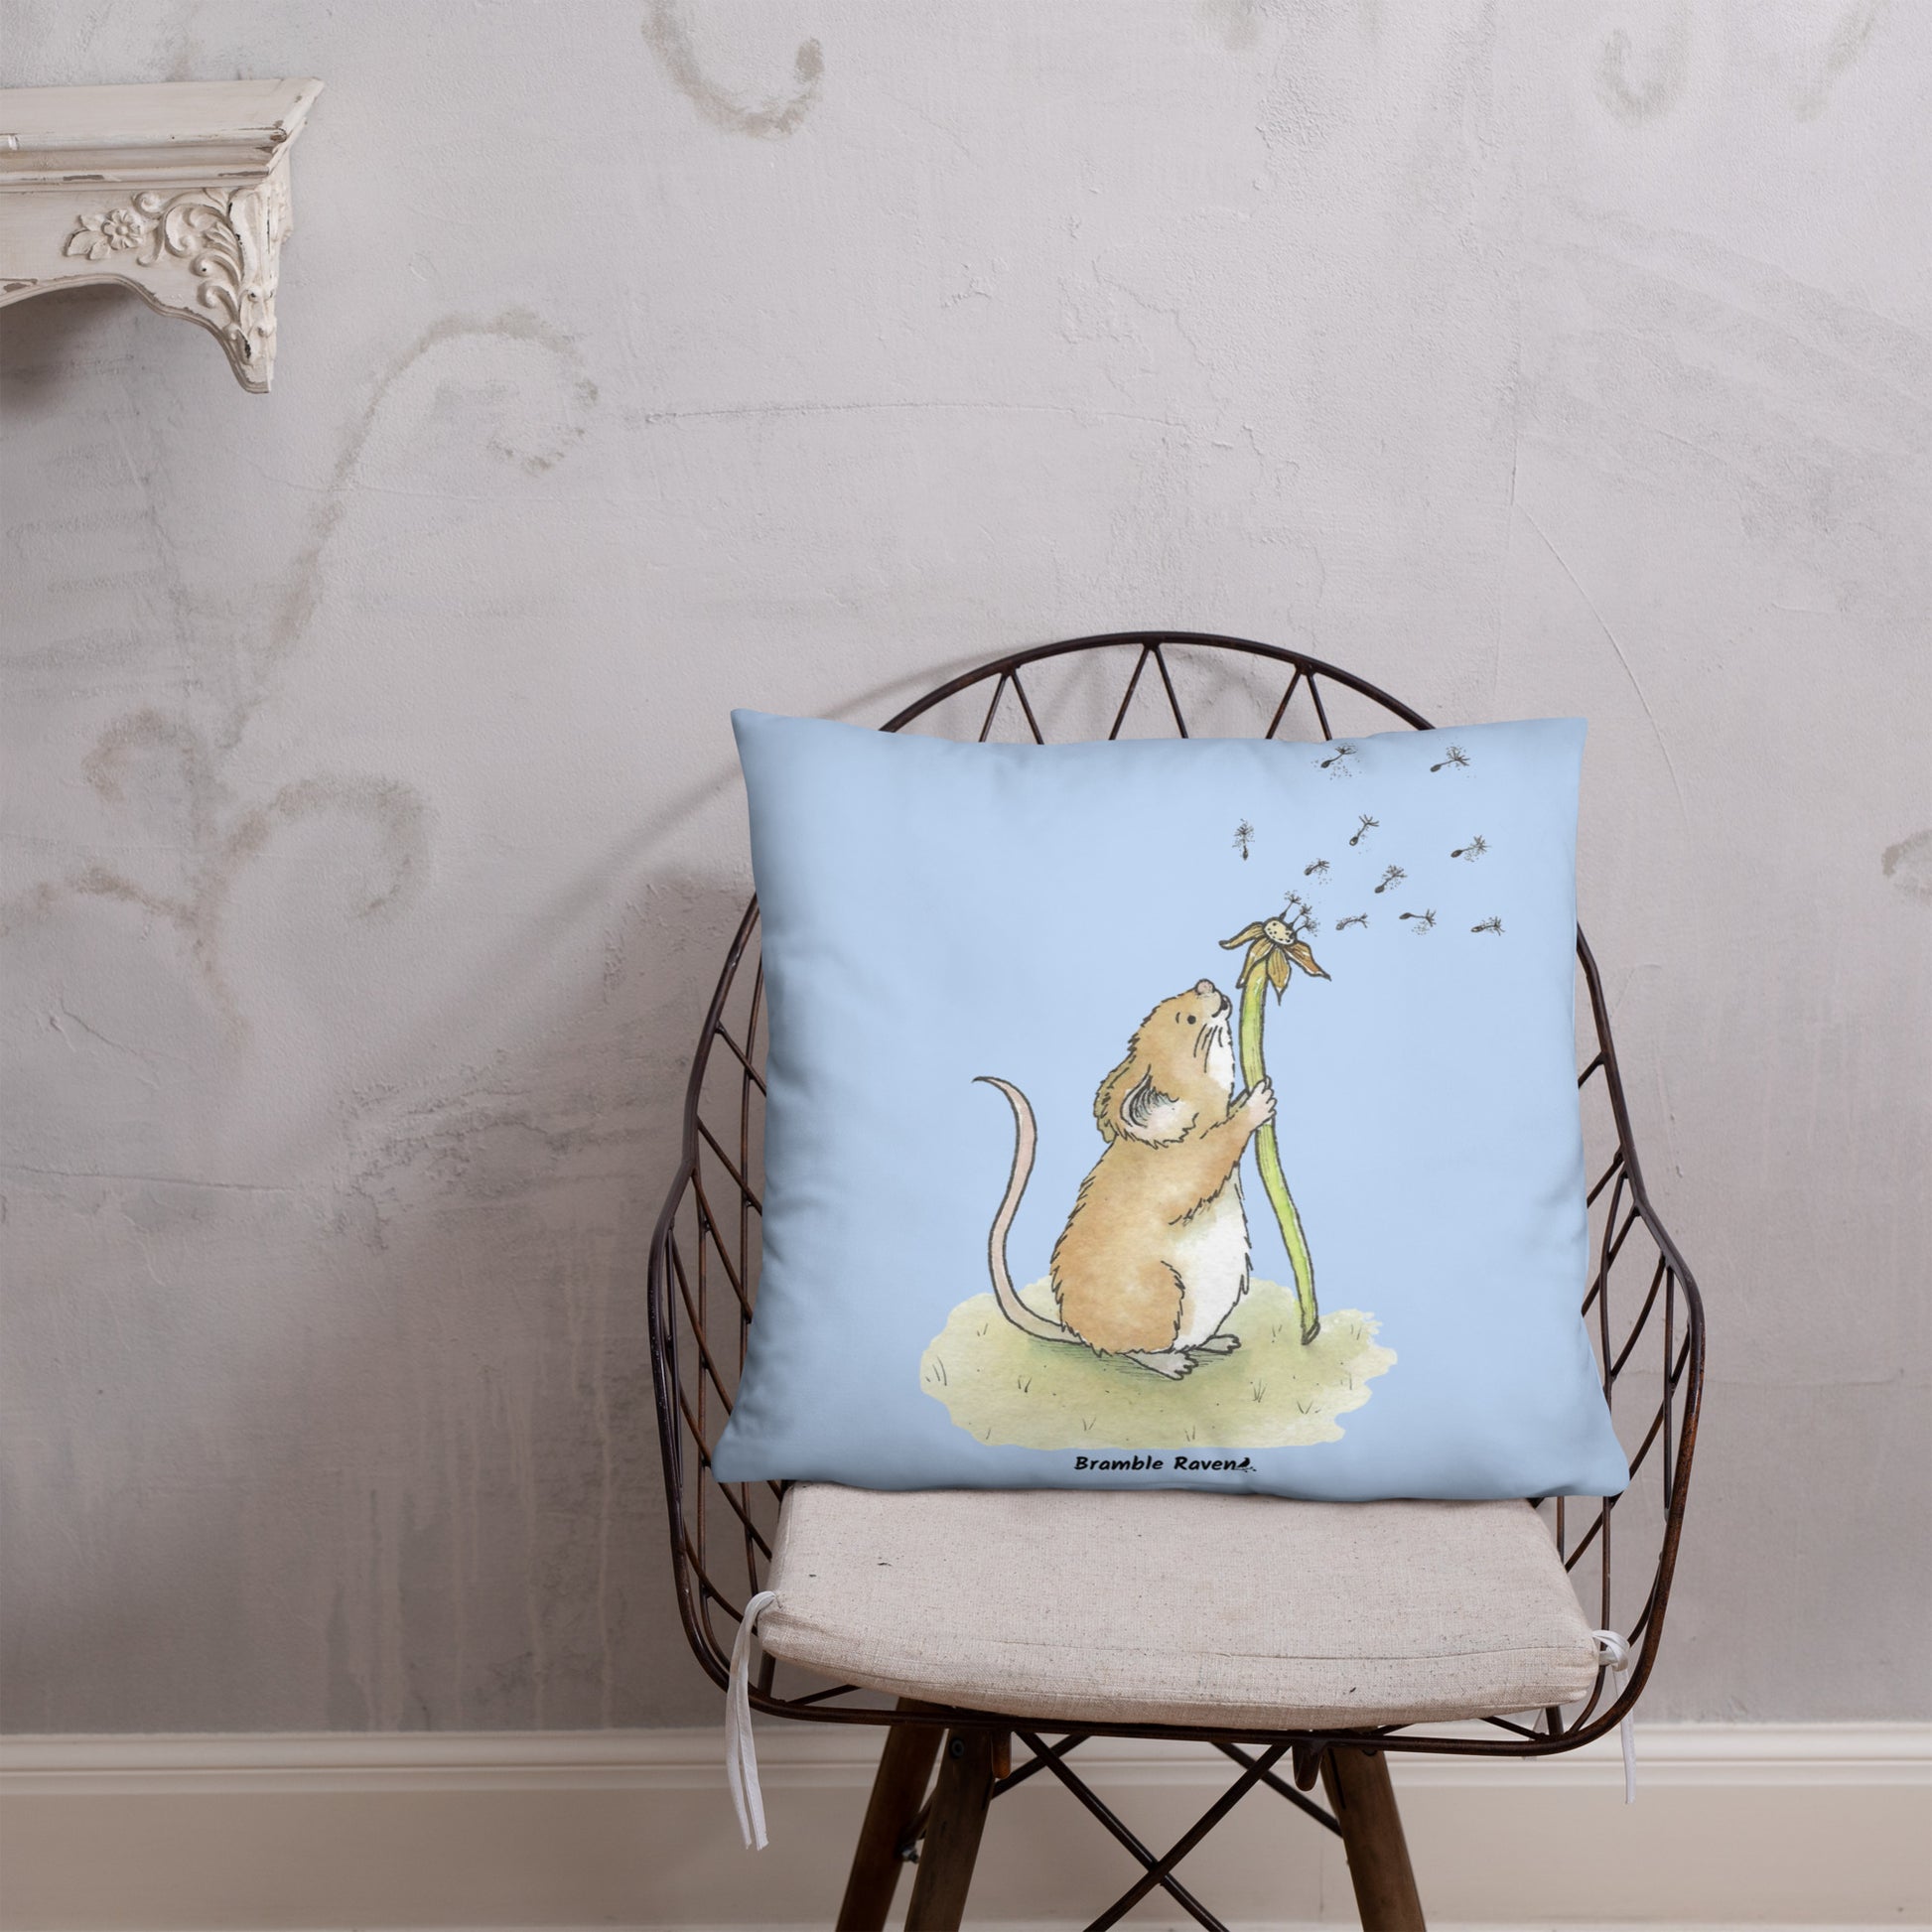 Original Dandelion Wish design of cute watercolor mouse blowing dandelion seeds on a light blue background. Double-sided image on 22 by 22 inch pillow. Shown on wicker chair.